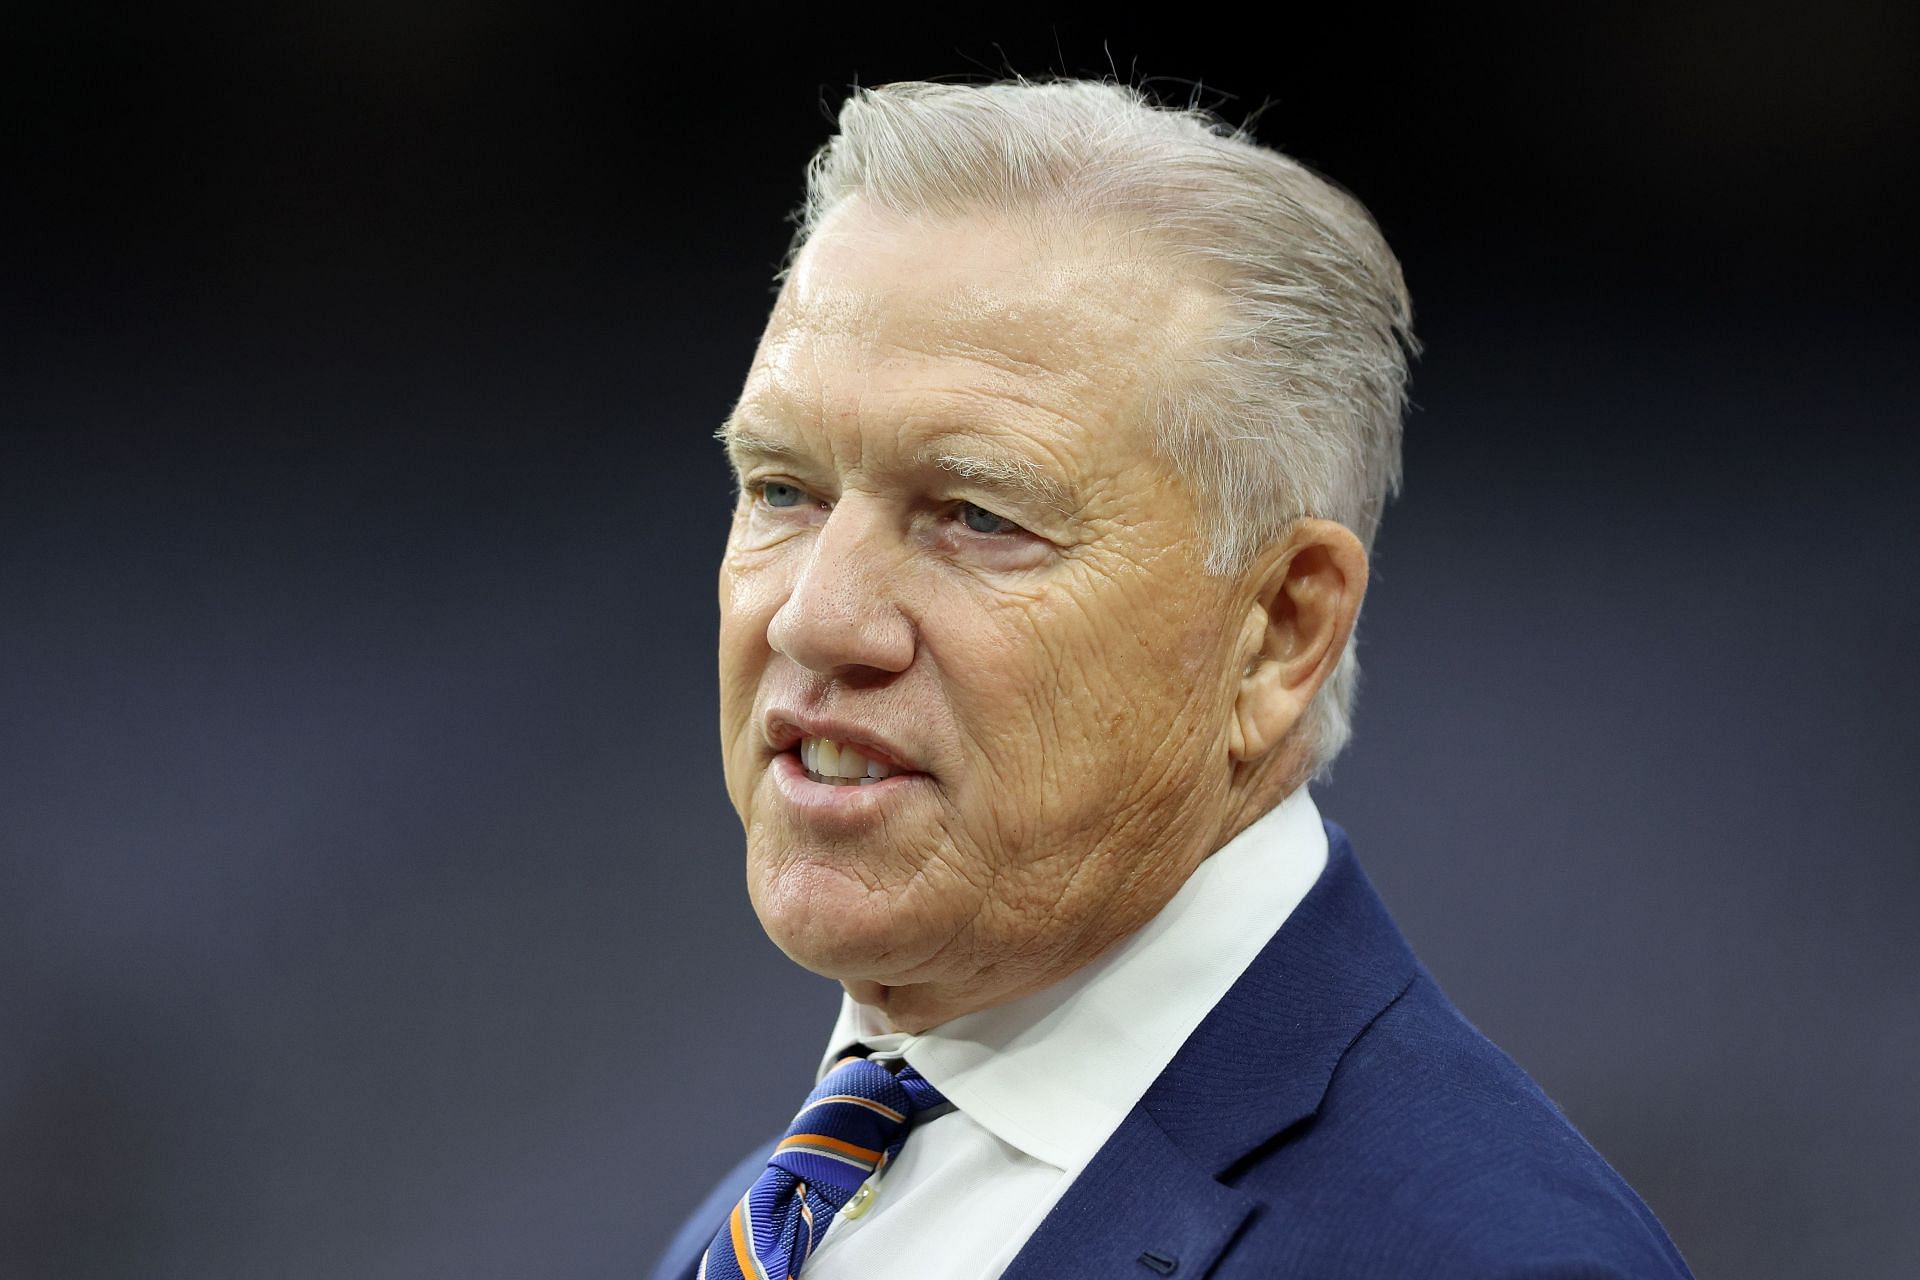 Doubt John Elway, and Broncos GM will keep proving you wrong